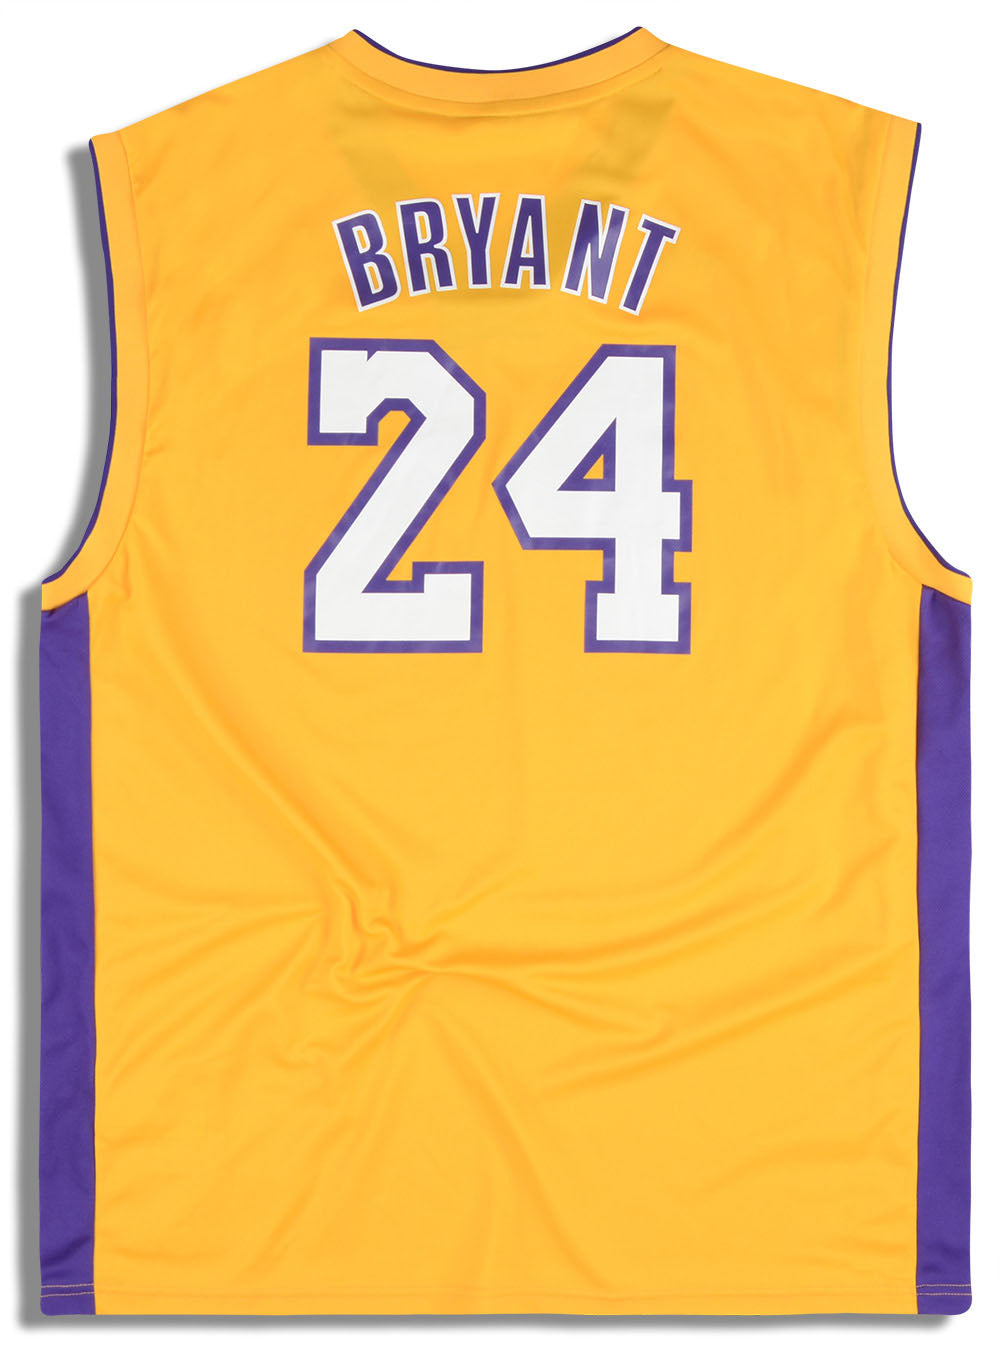 2010-14 LA LAKERS BRYANT #24 ADIDAS JERSEY (HOME) S - Classic American  Sports